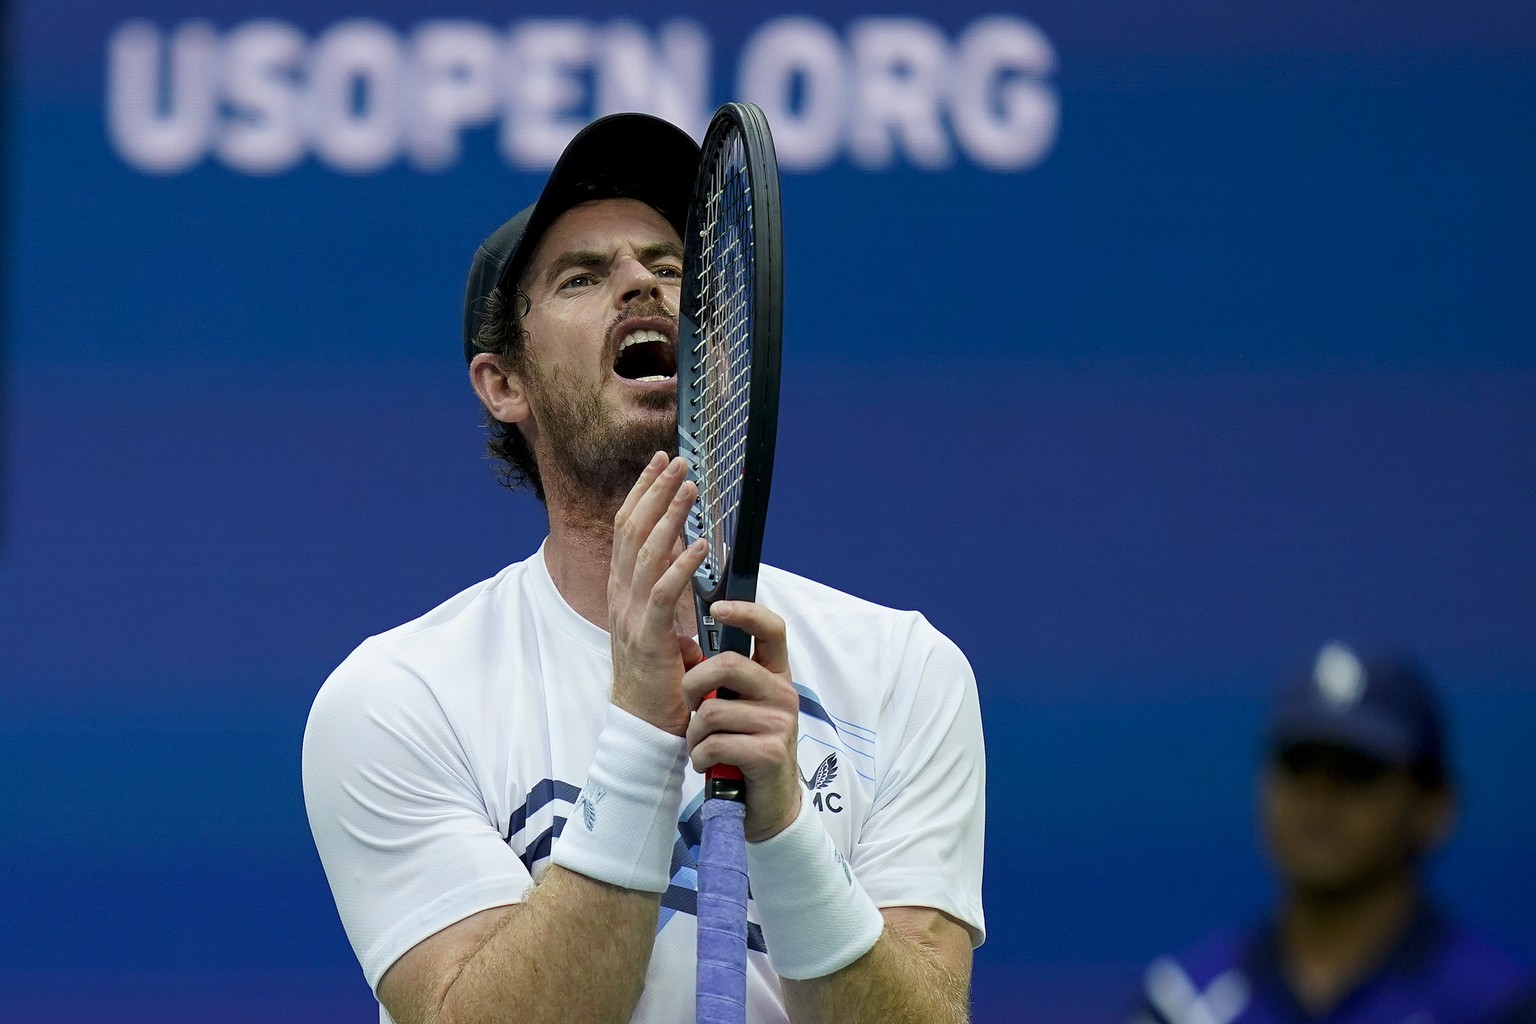 Andy Murray, of Great Britain, reacts after losing a point to Stefanos Tsitsipas, of Greece, during the first round of the US Open tennis championships, Monday, Aug. 30, 2021, in New York. (AP Photo/S ...